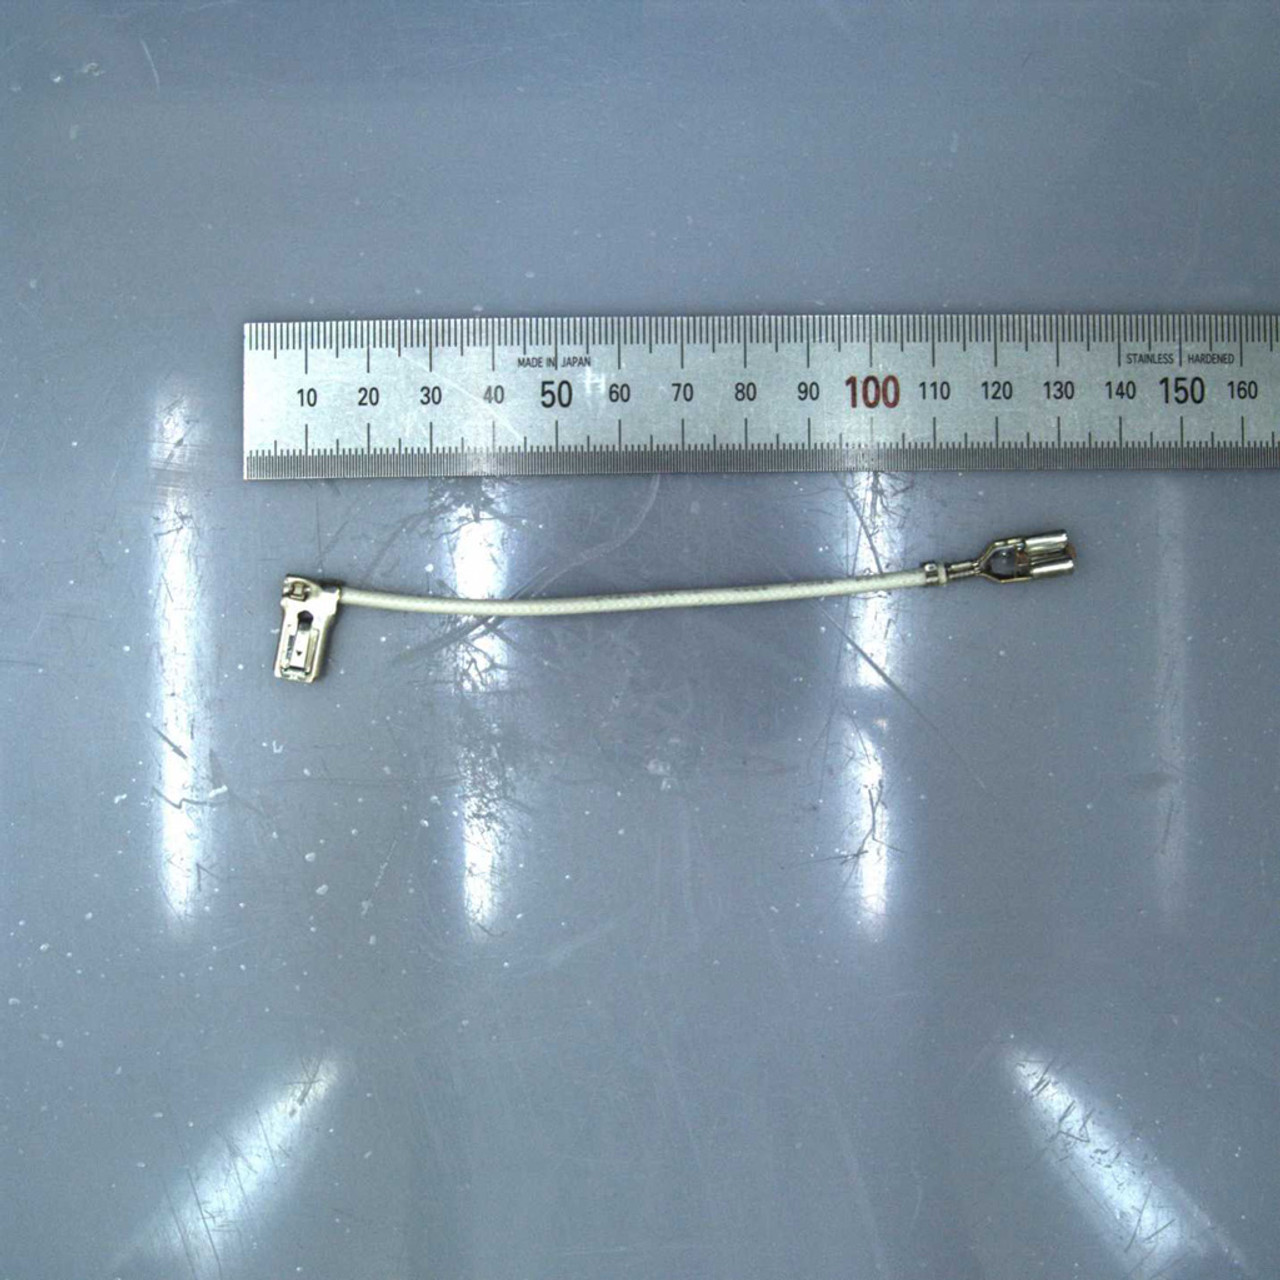 HARNESS-FUSER JOINT,ML-3710,1 pin,100mm, - JC39-01487A